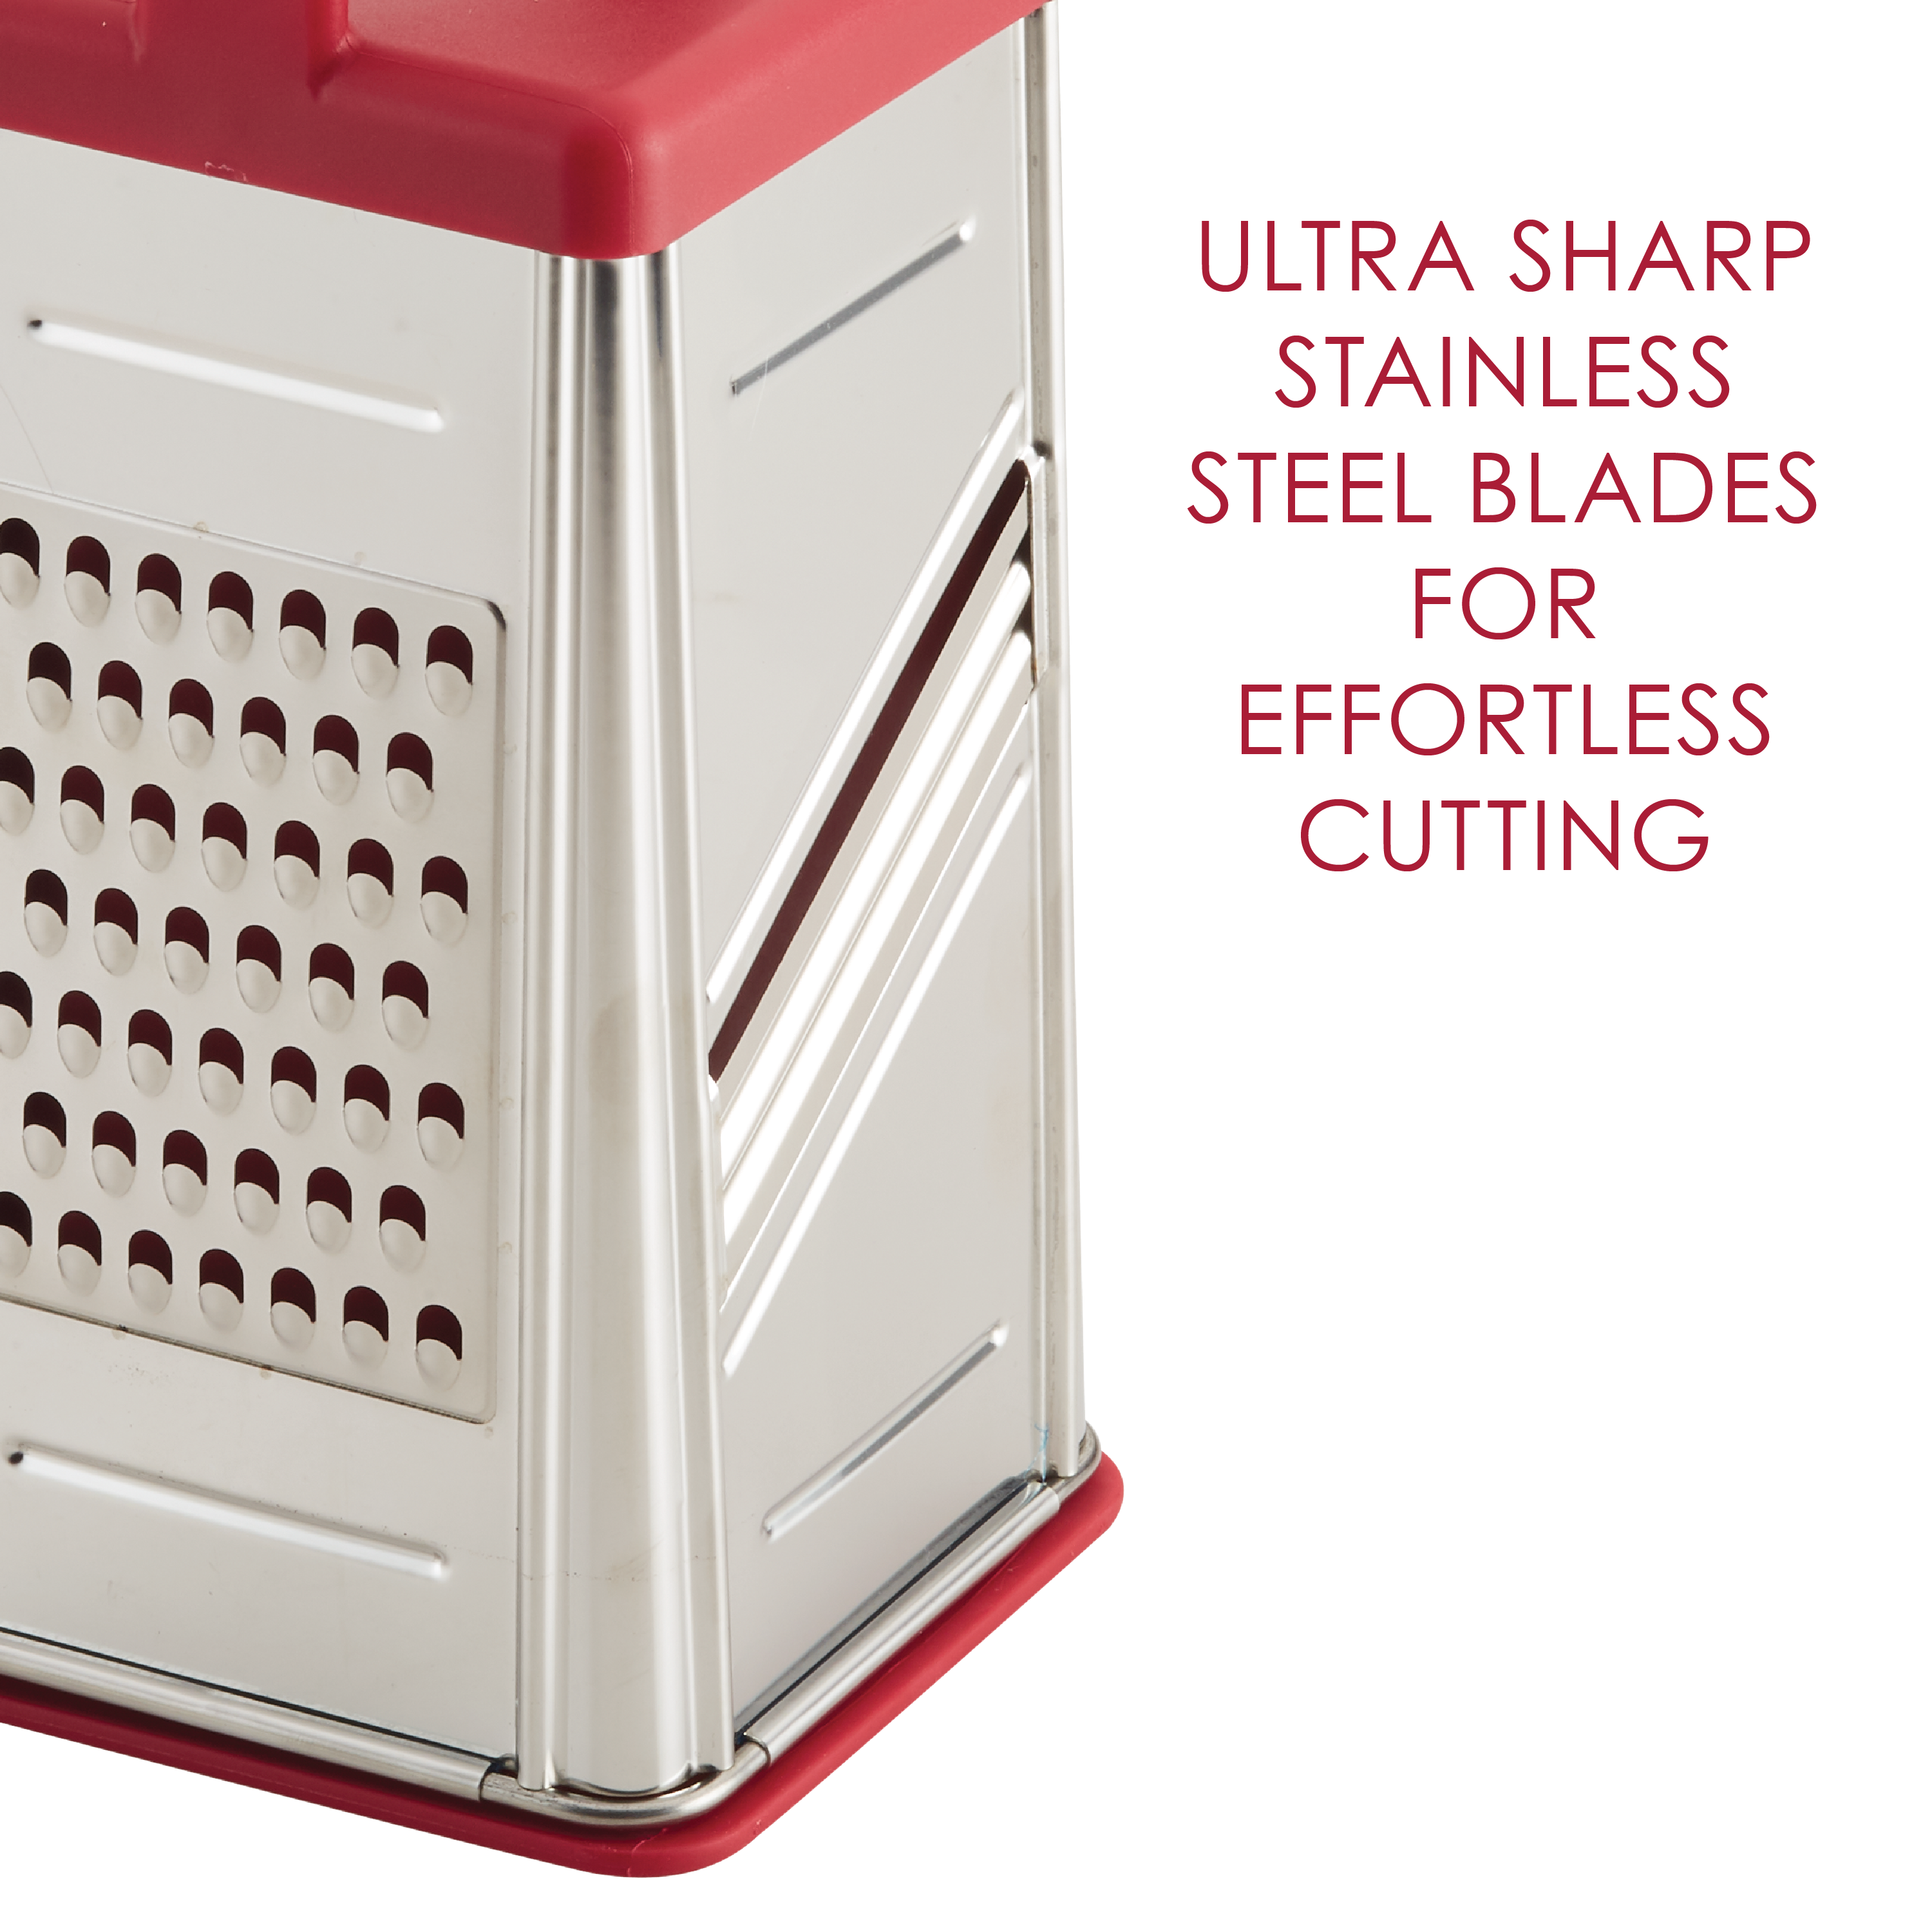 9'' Cheese Grater Box Sided Cheese Shredder Stainless Steel Kitchen Tool